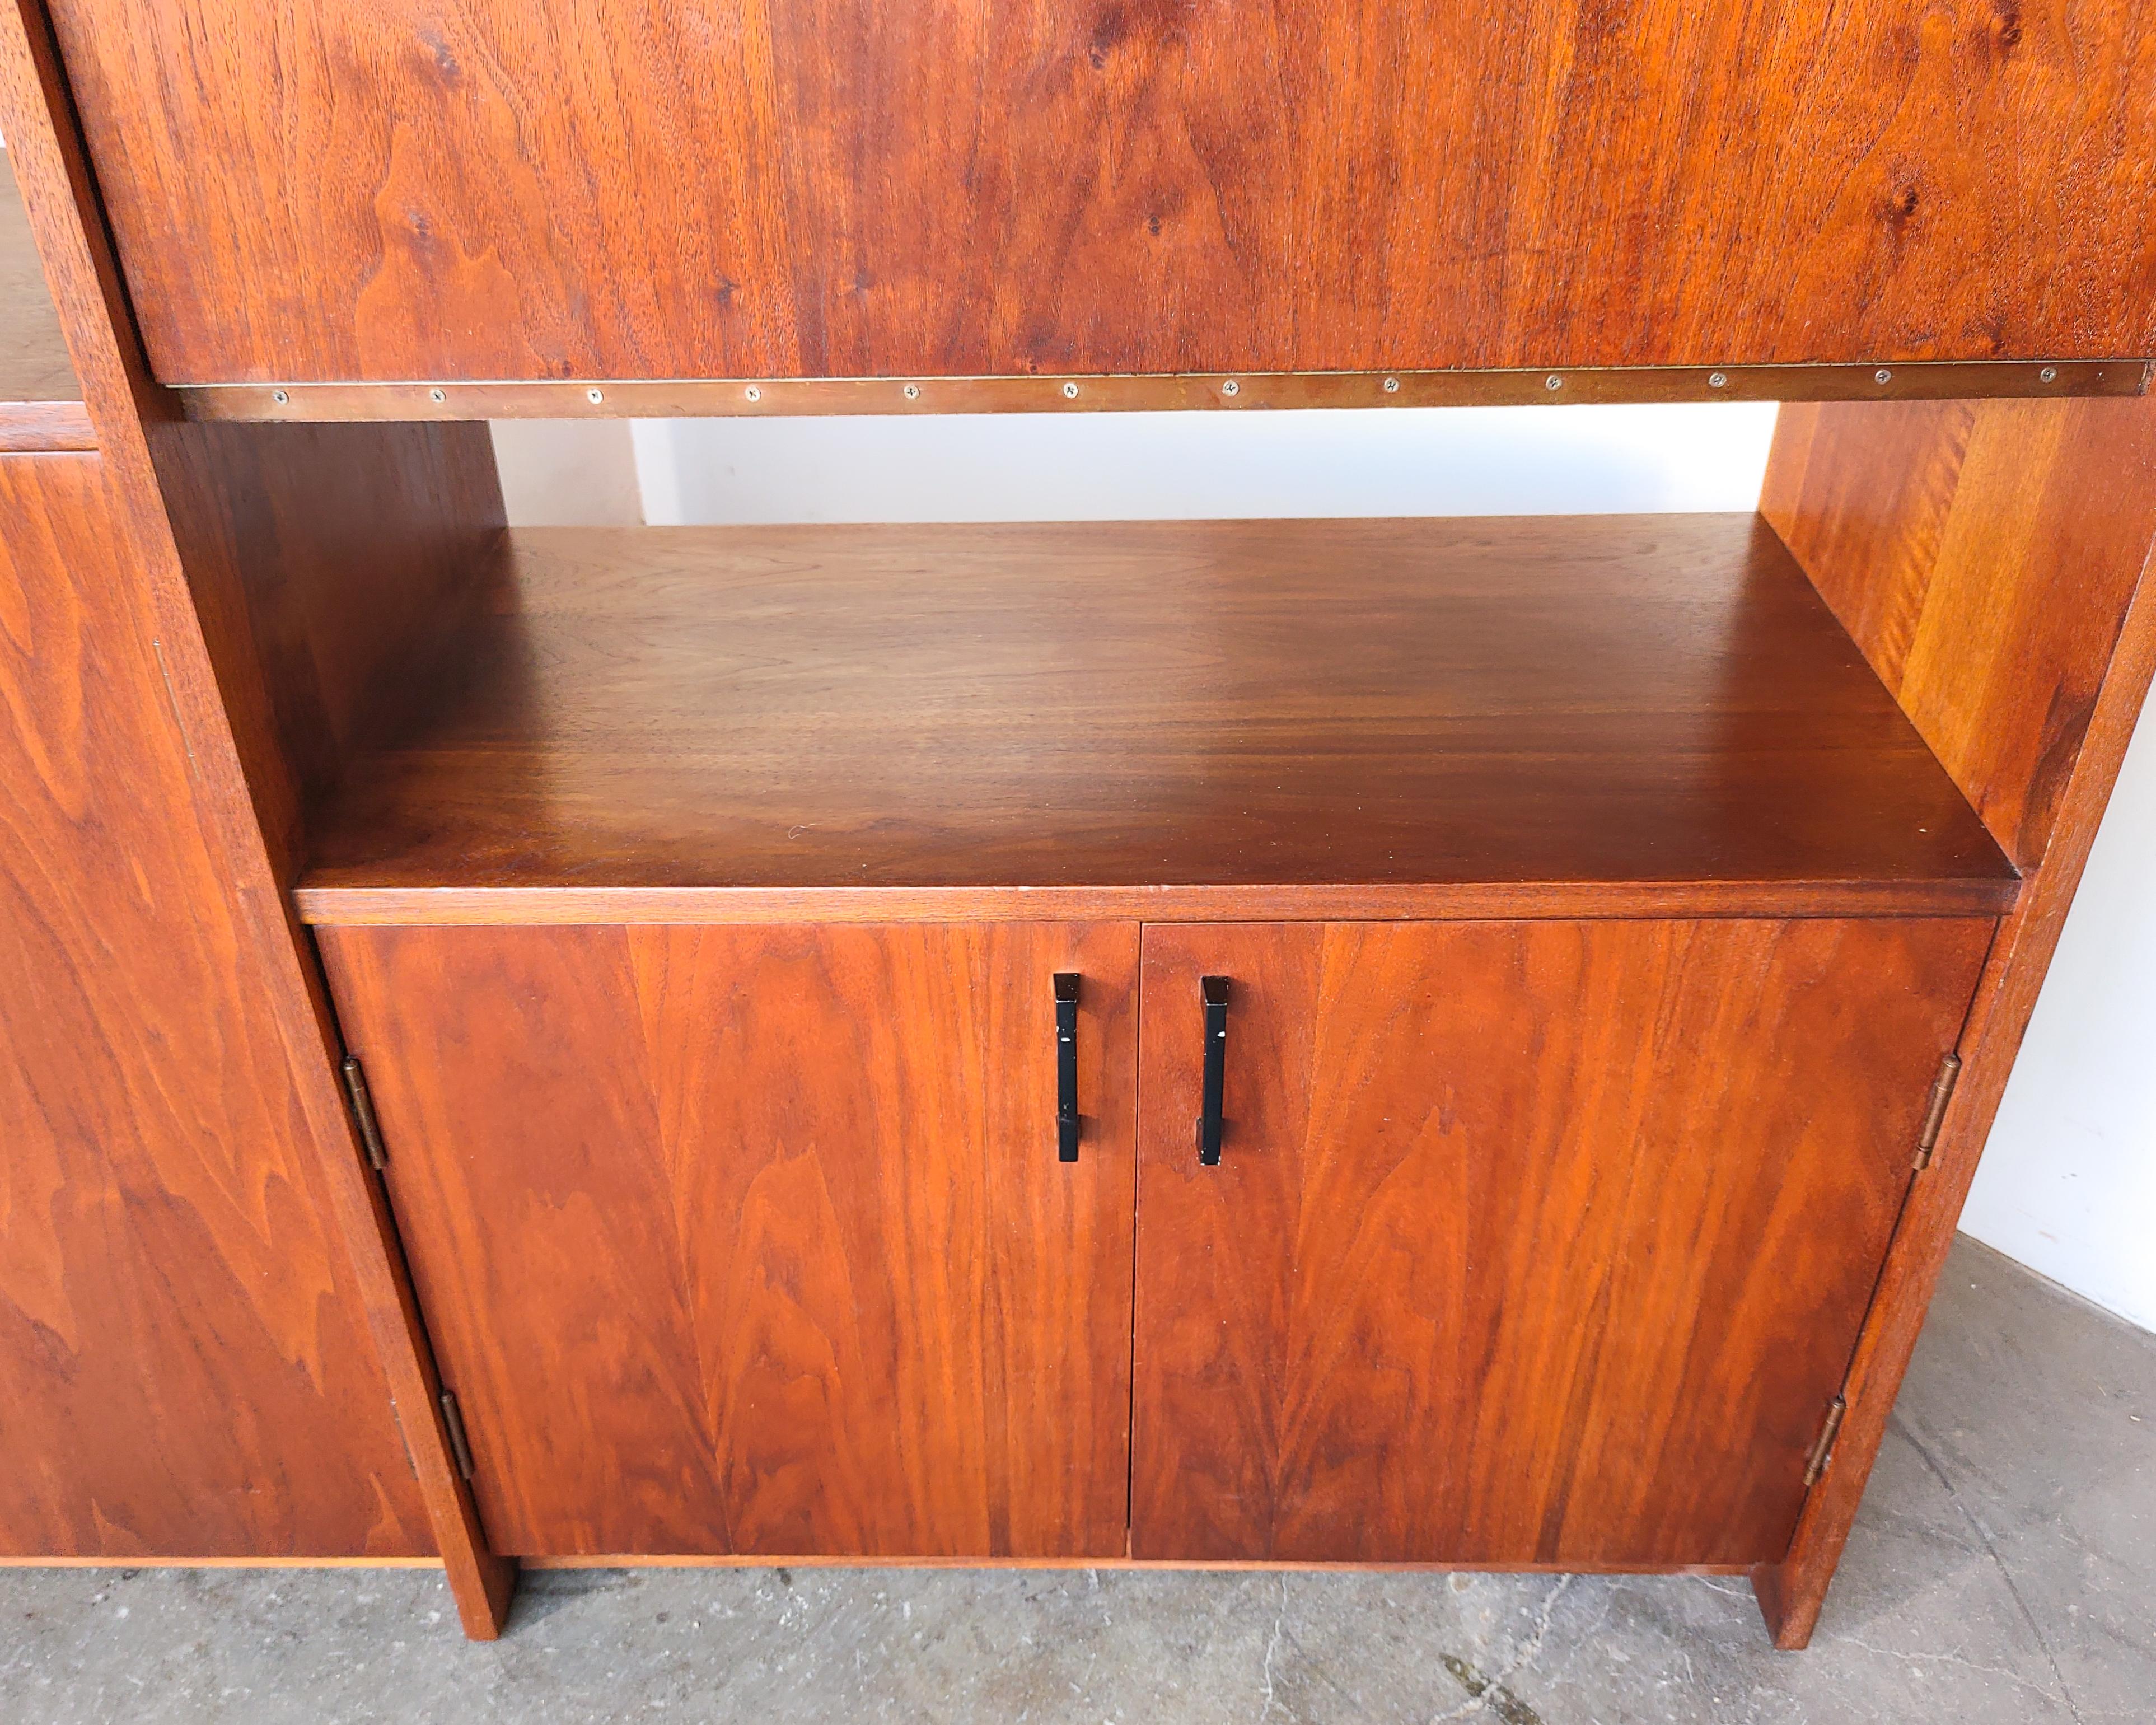 1960s Mid-Century Modern Walnut Room Divider / Wall Unit with Drop-Down Desk 6